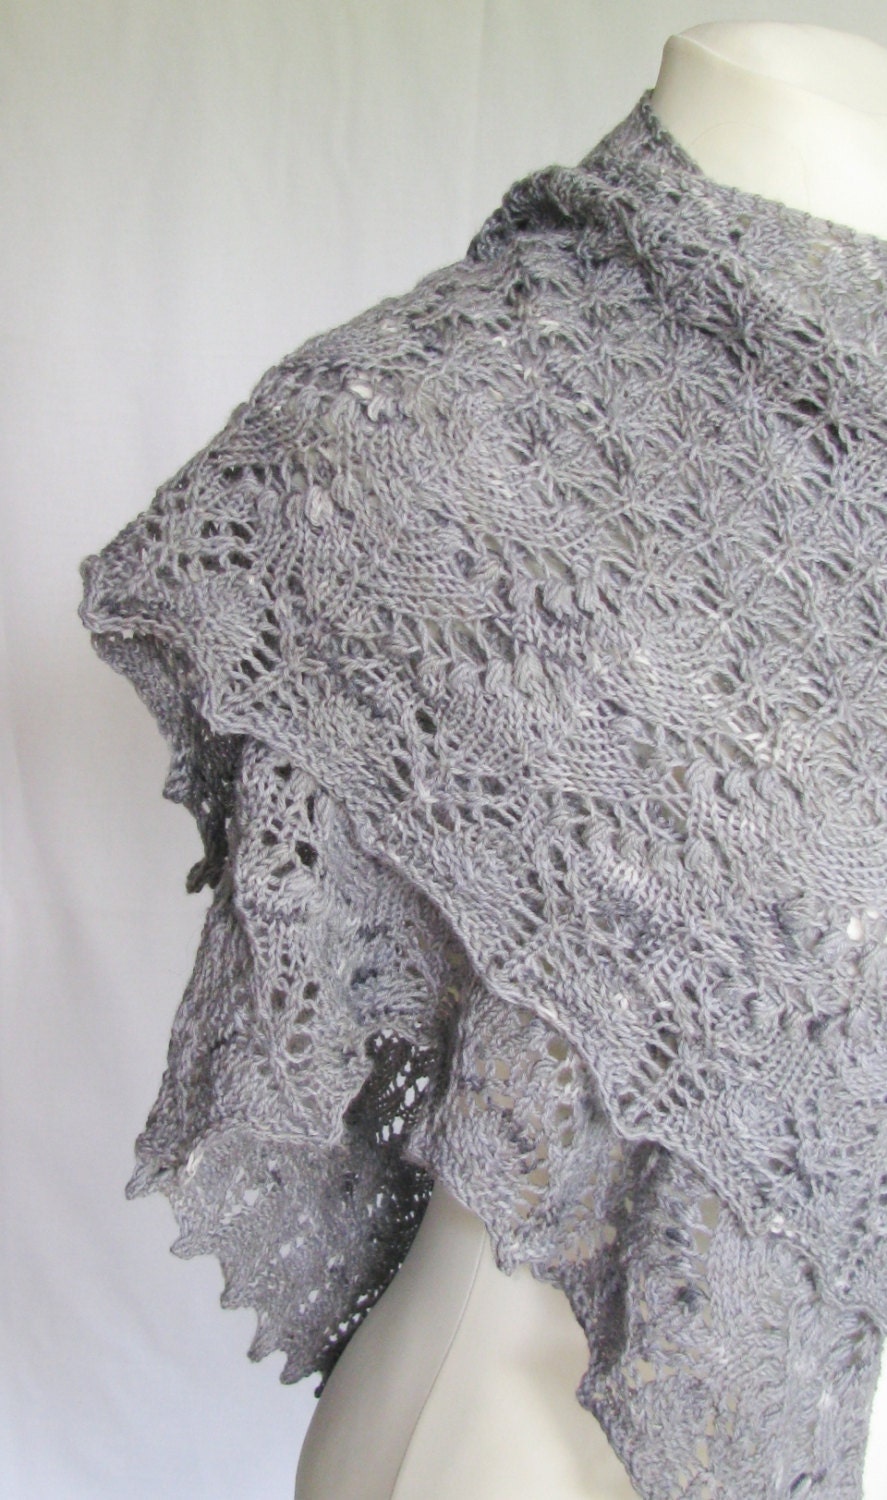 Luxurious knit wool gray shawl, openwork lacy and stylish gift OOAK - delectare